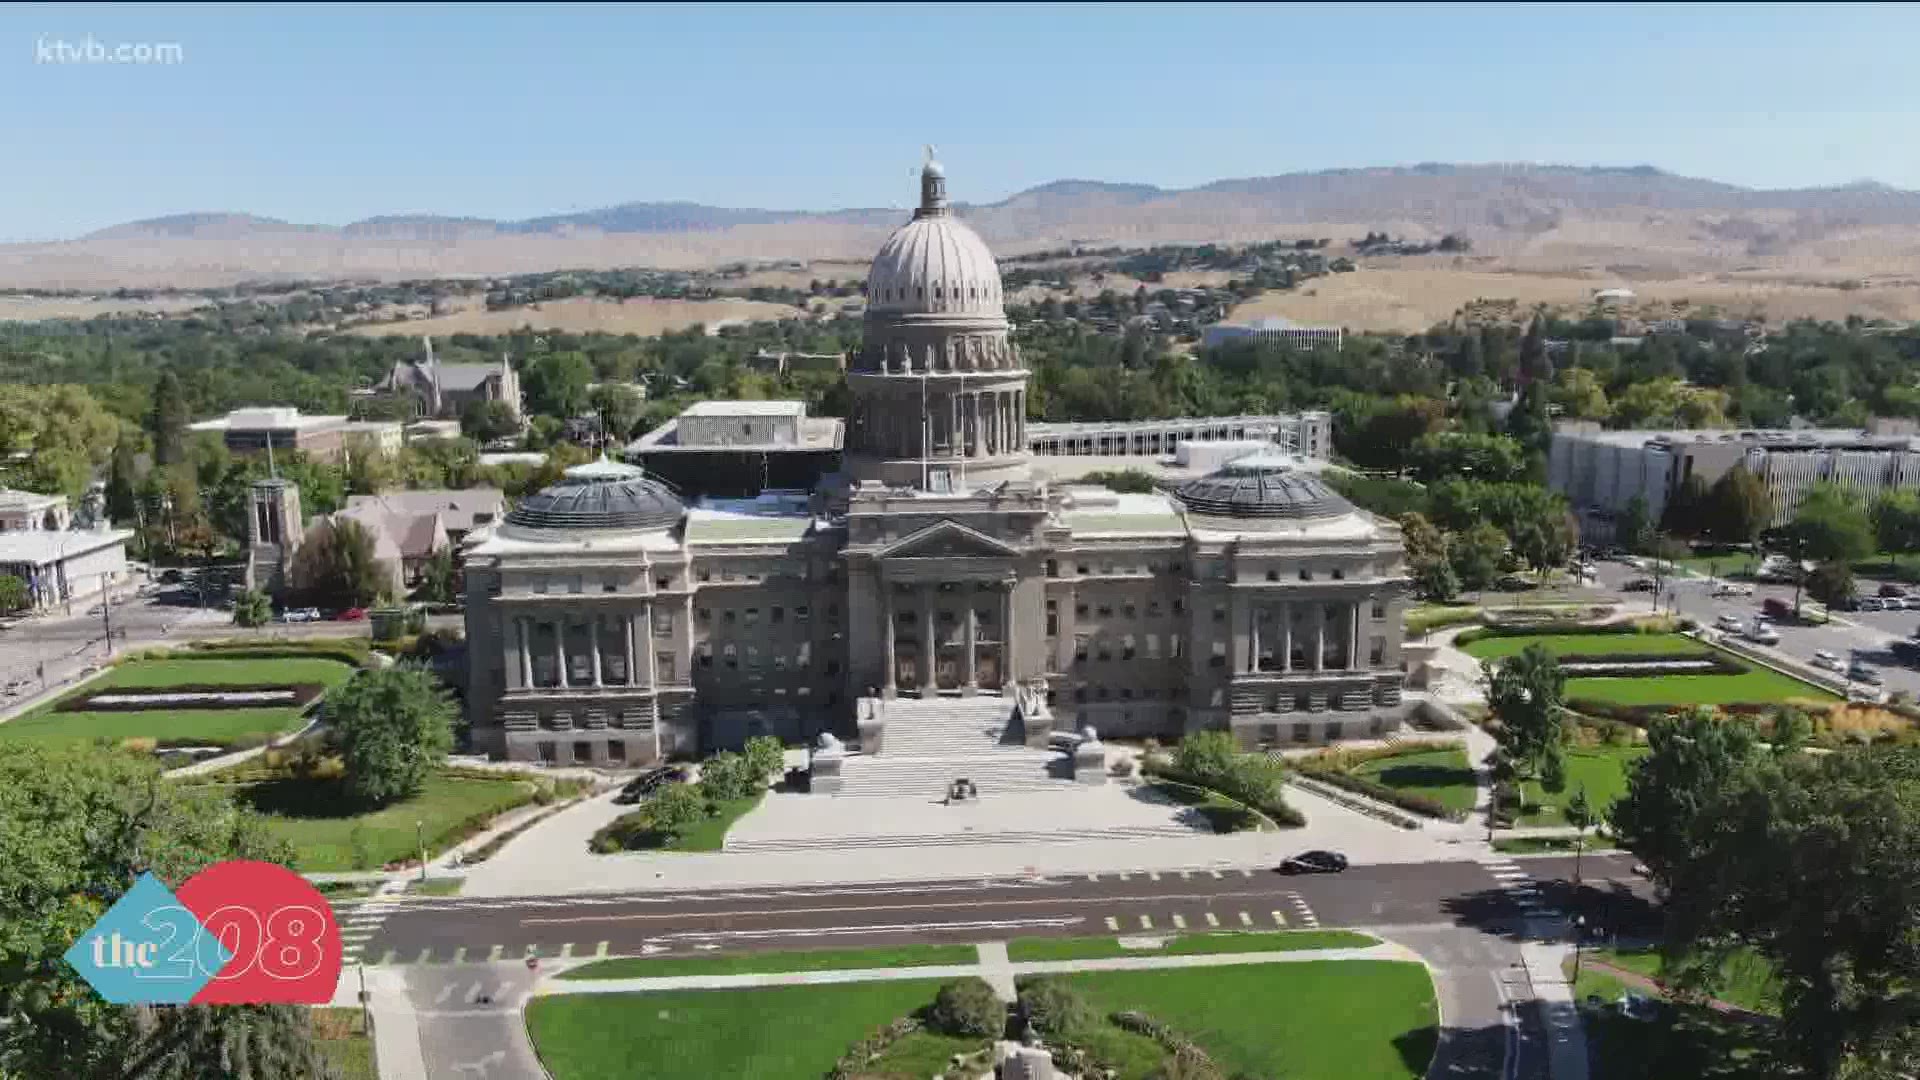 At 208 feet high, the Idaho Capitol is not the tallest building in town, but what it lacks in elevation it makes up for in expanse.